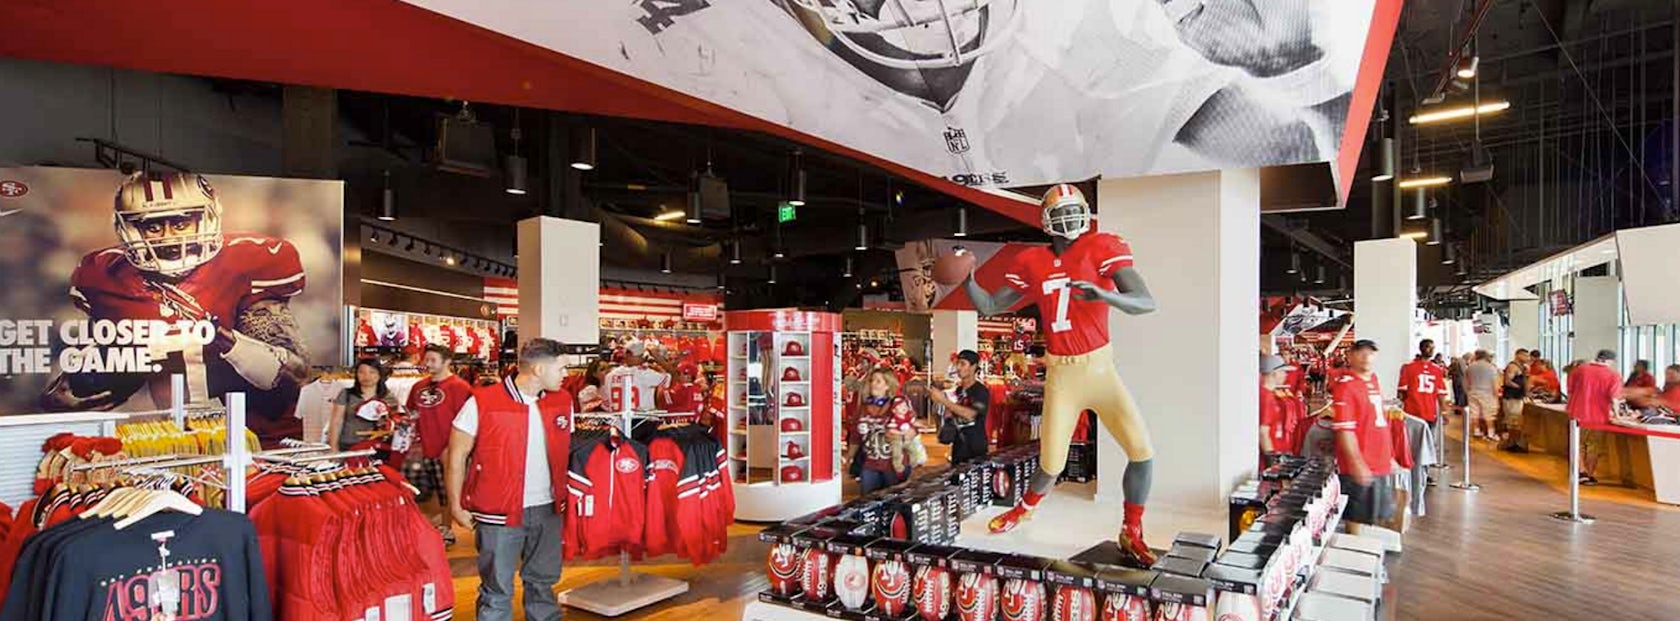 49ers Levi's Stadium by HNTB Architecture - Architizer